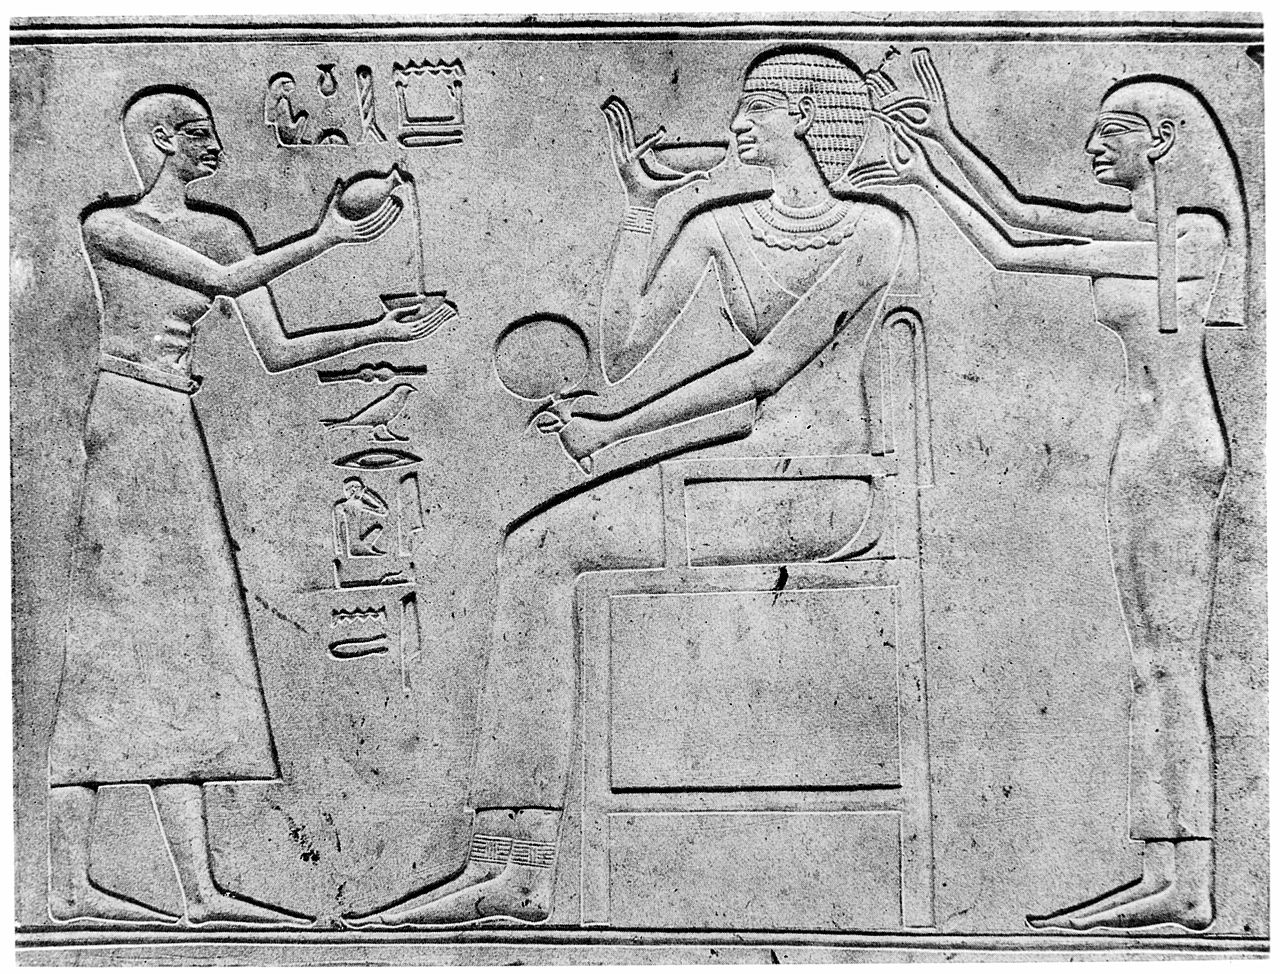 Queen Kawit having her hair styled by Innu, 11th Dynasty sarcophagus in Cairo Museum c) wikipedia.